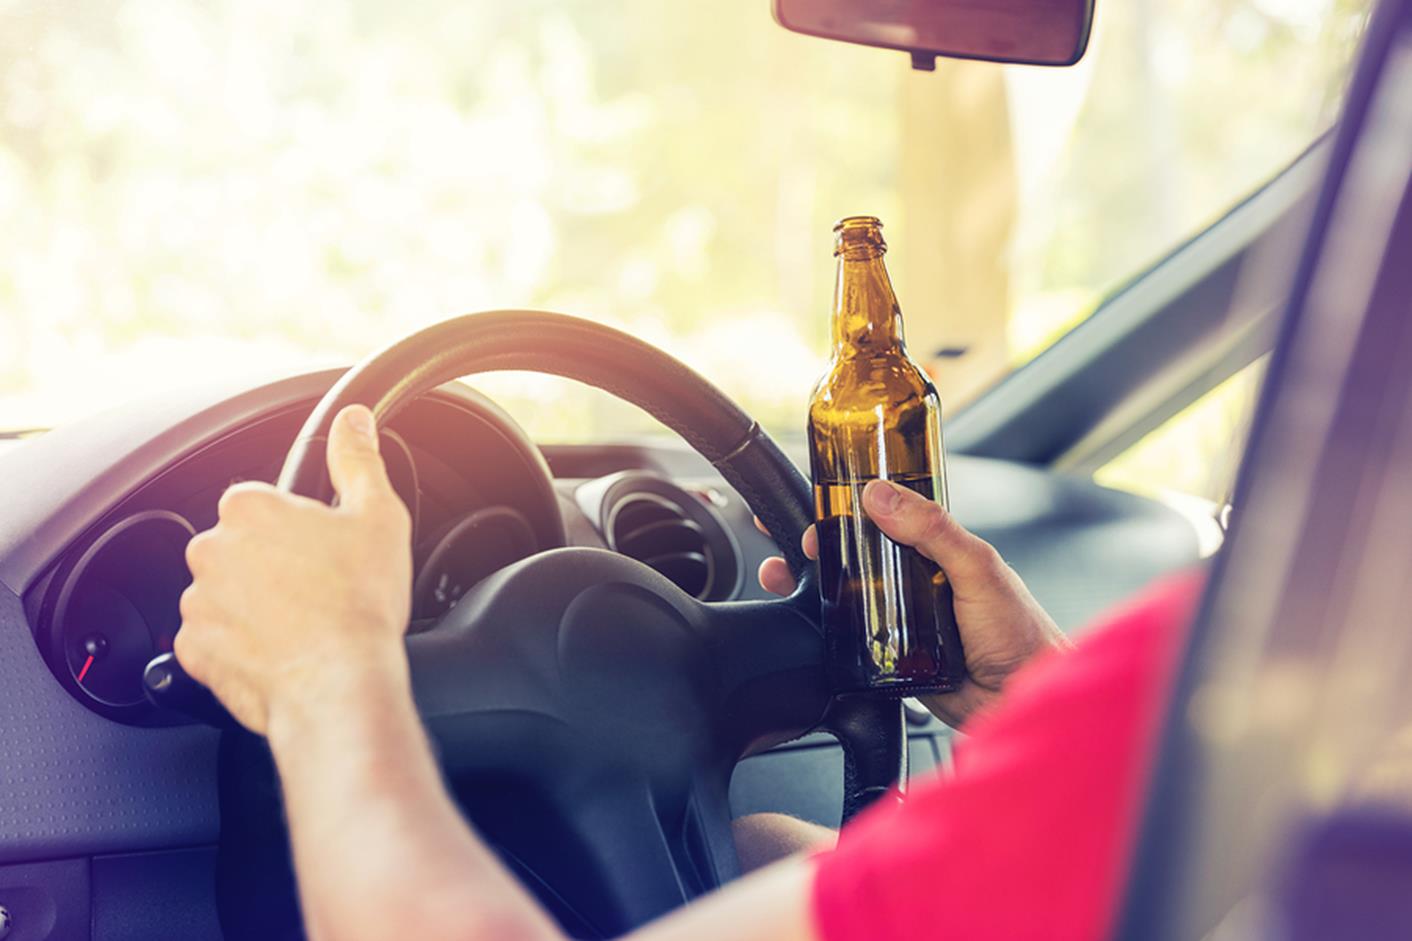 As Labor Day Approaches, Watch for Drunk Drivers